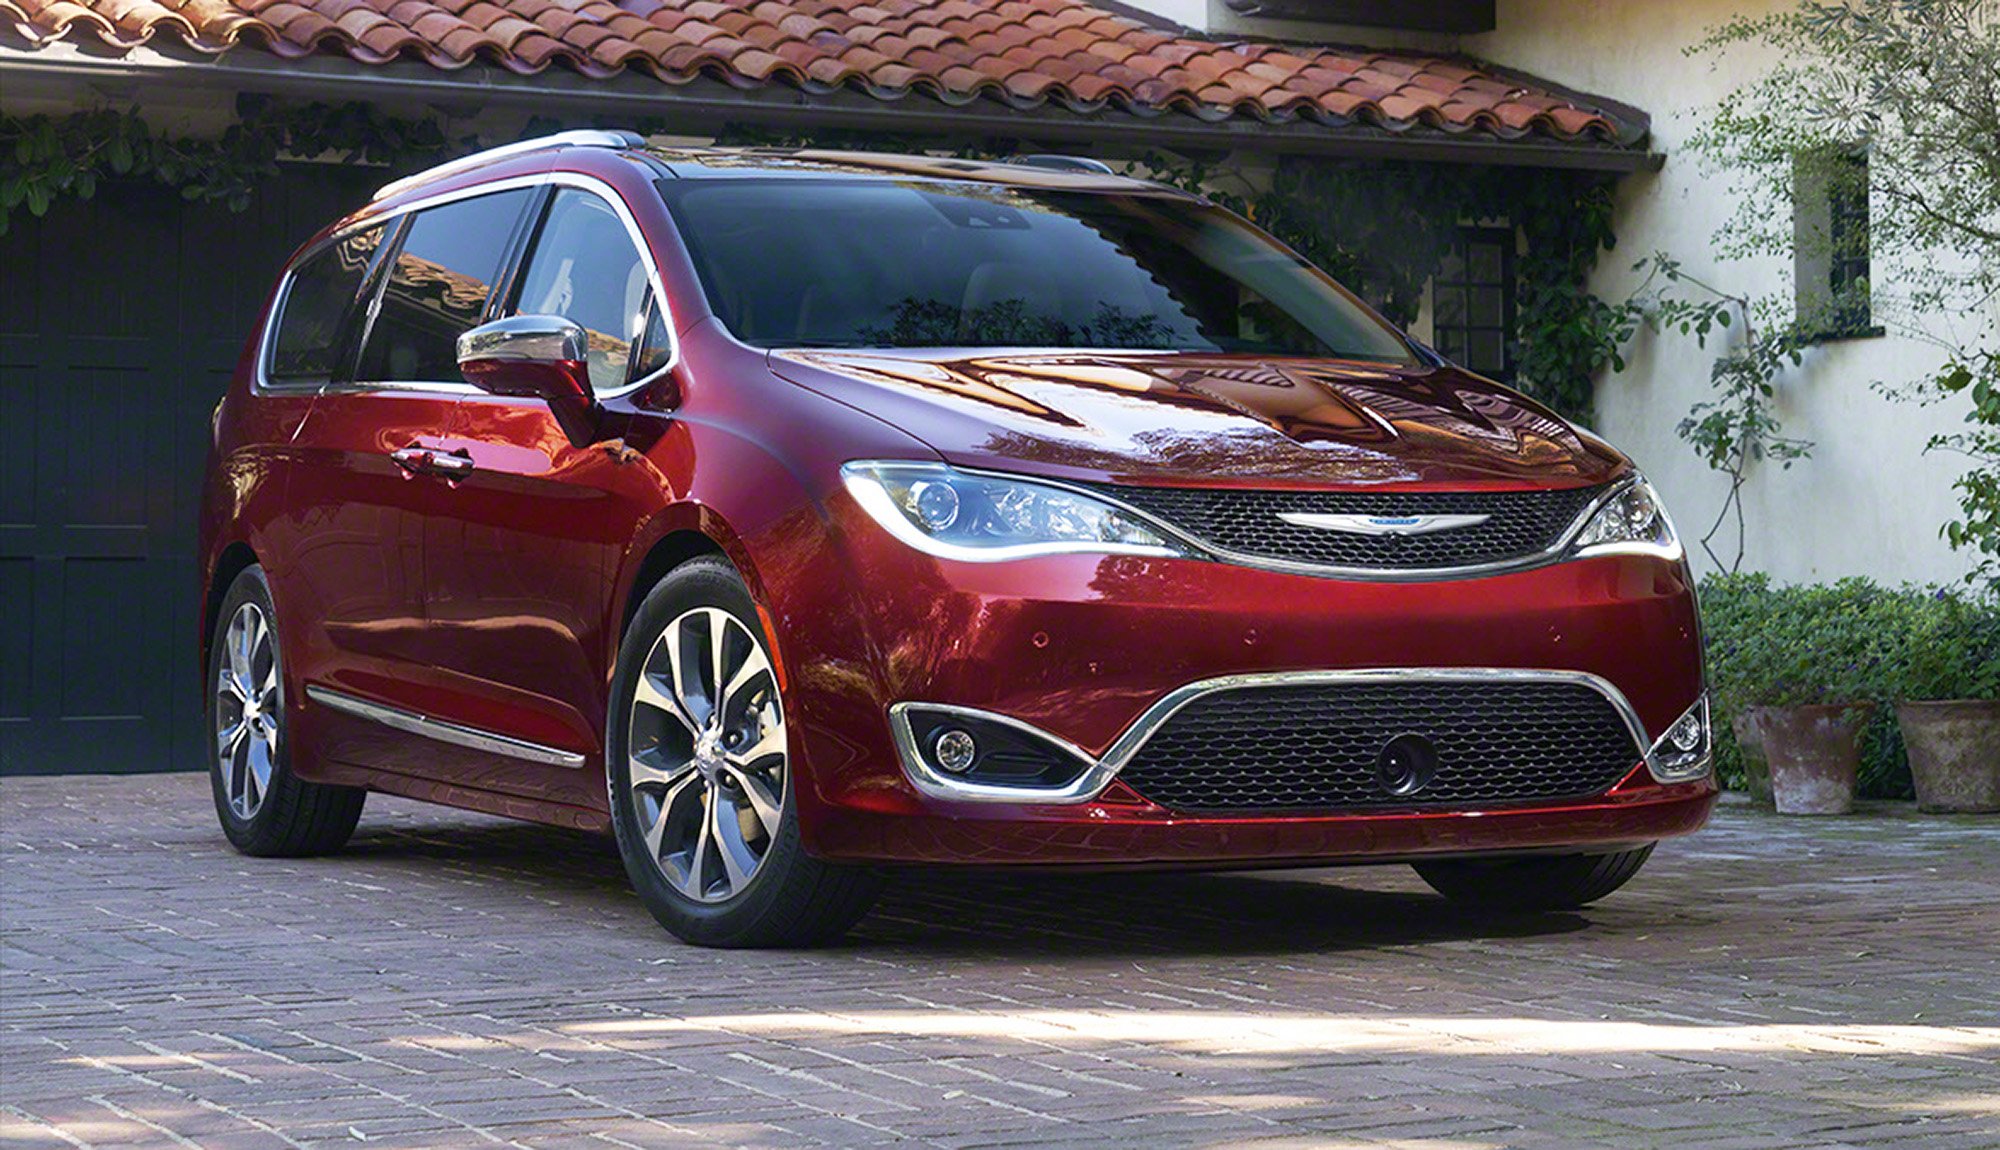 2016 Chrysler Pacifica Grand Voyager replacement appears